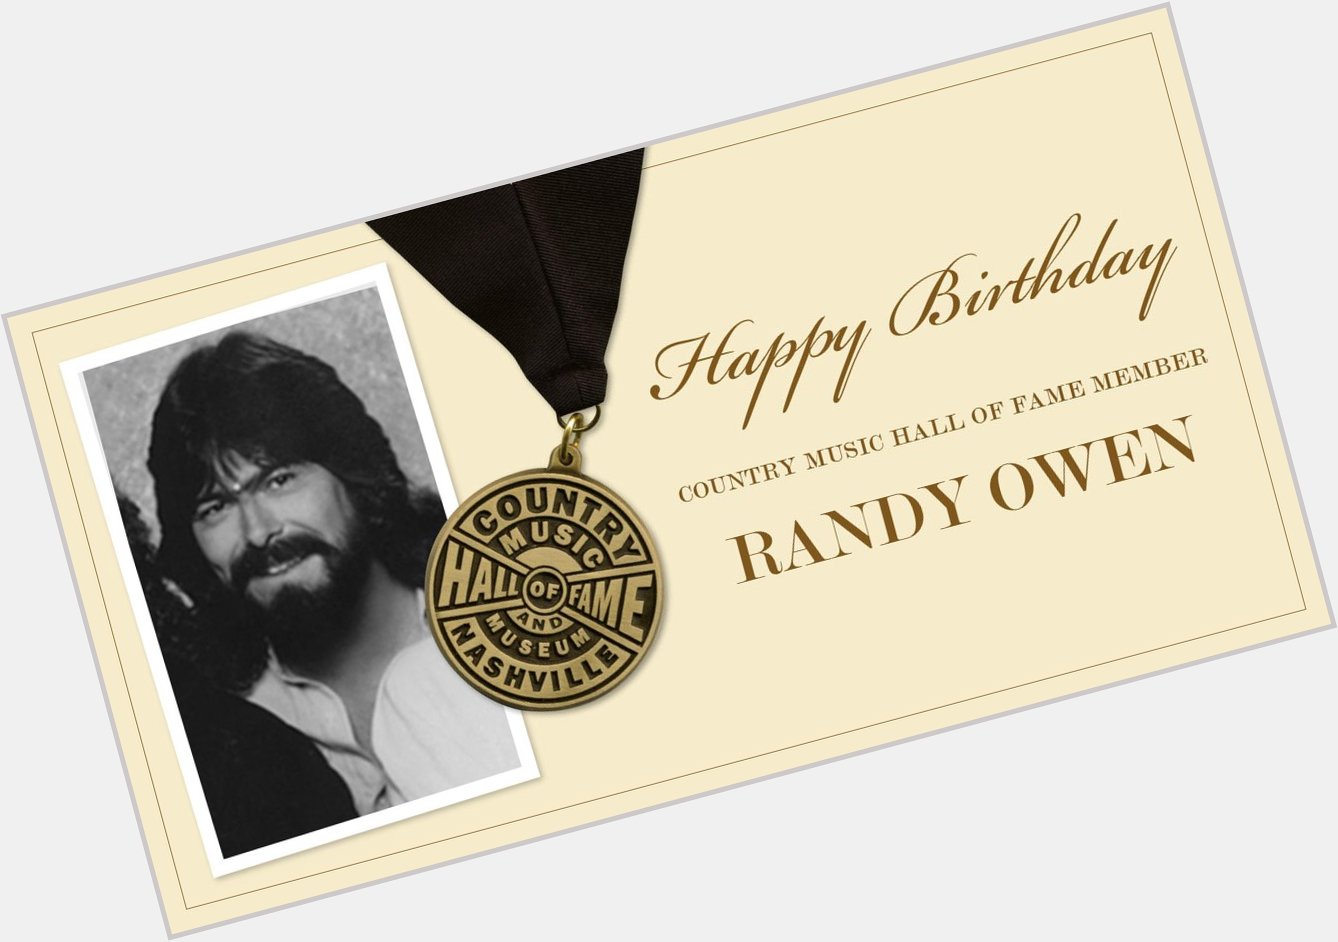 Help us wish Country Music Hall of Fame member and front-man Randy Owen a very Happy Birthday! 